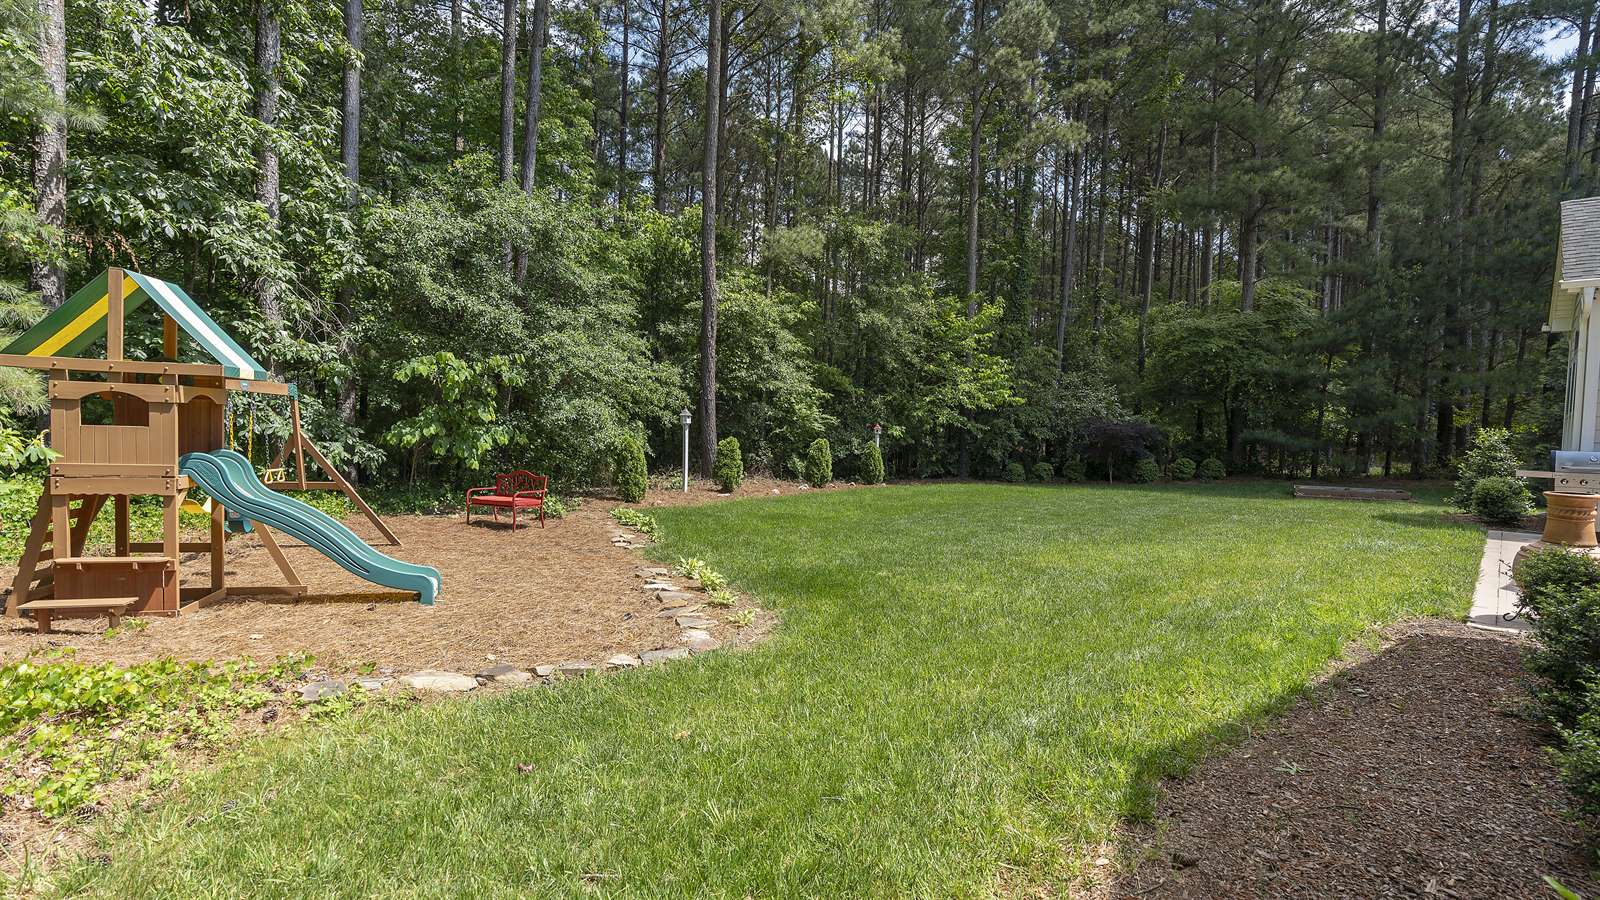 228 Silvercliff, Mount Holly, NC 28120